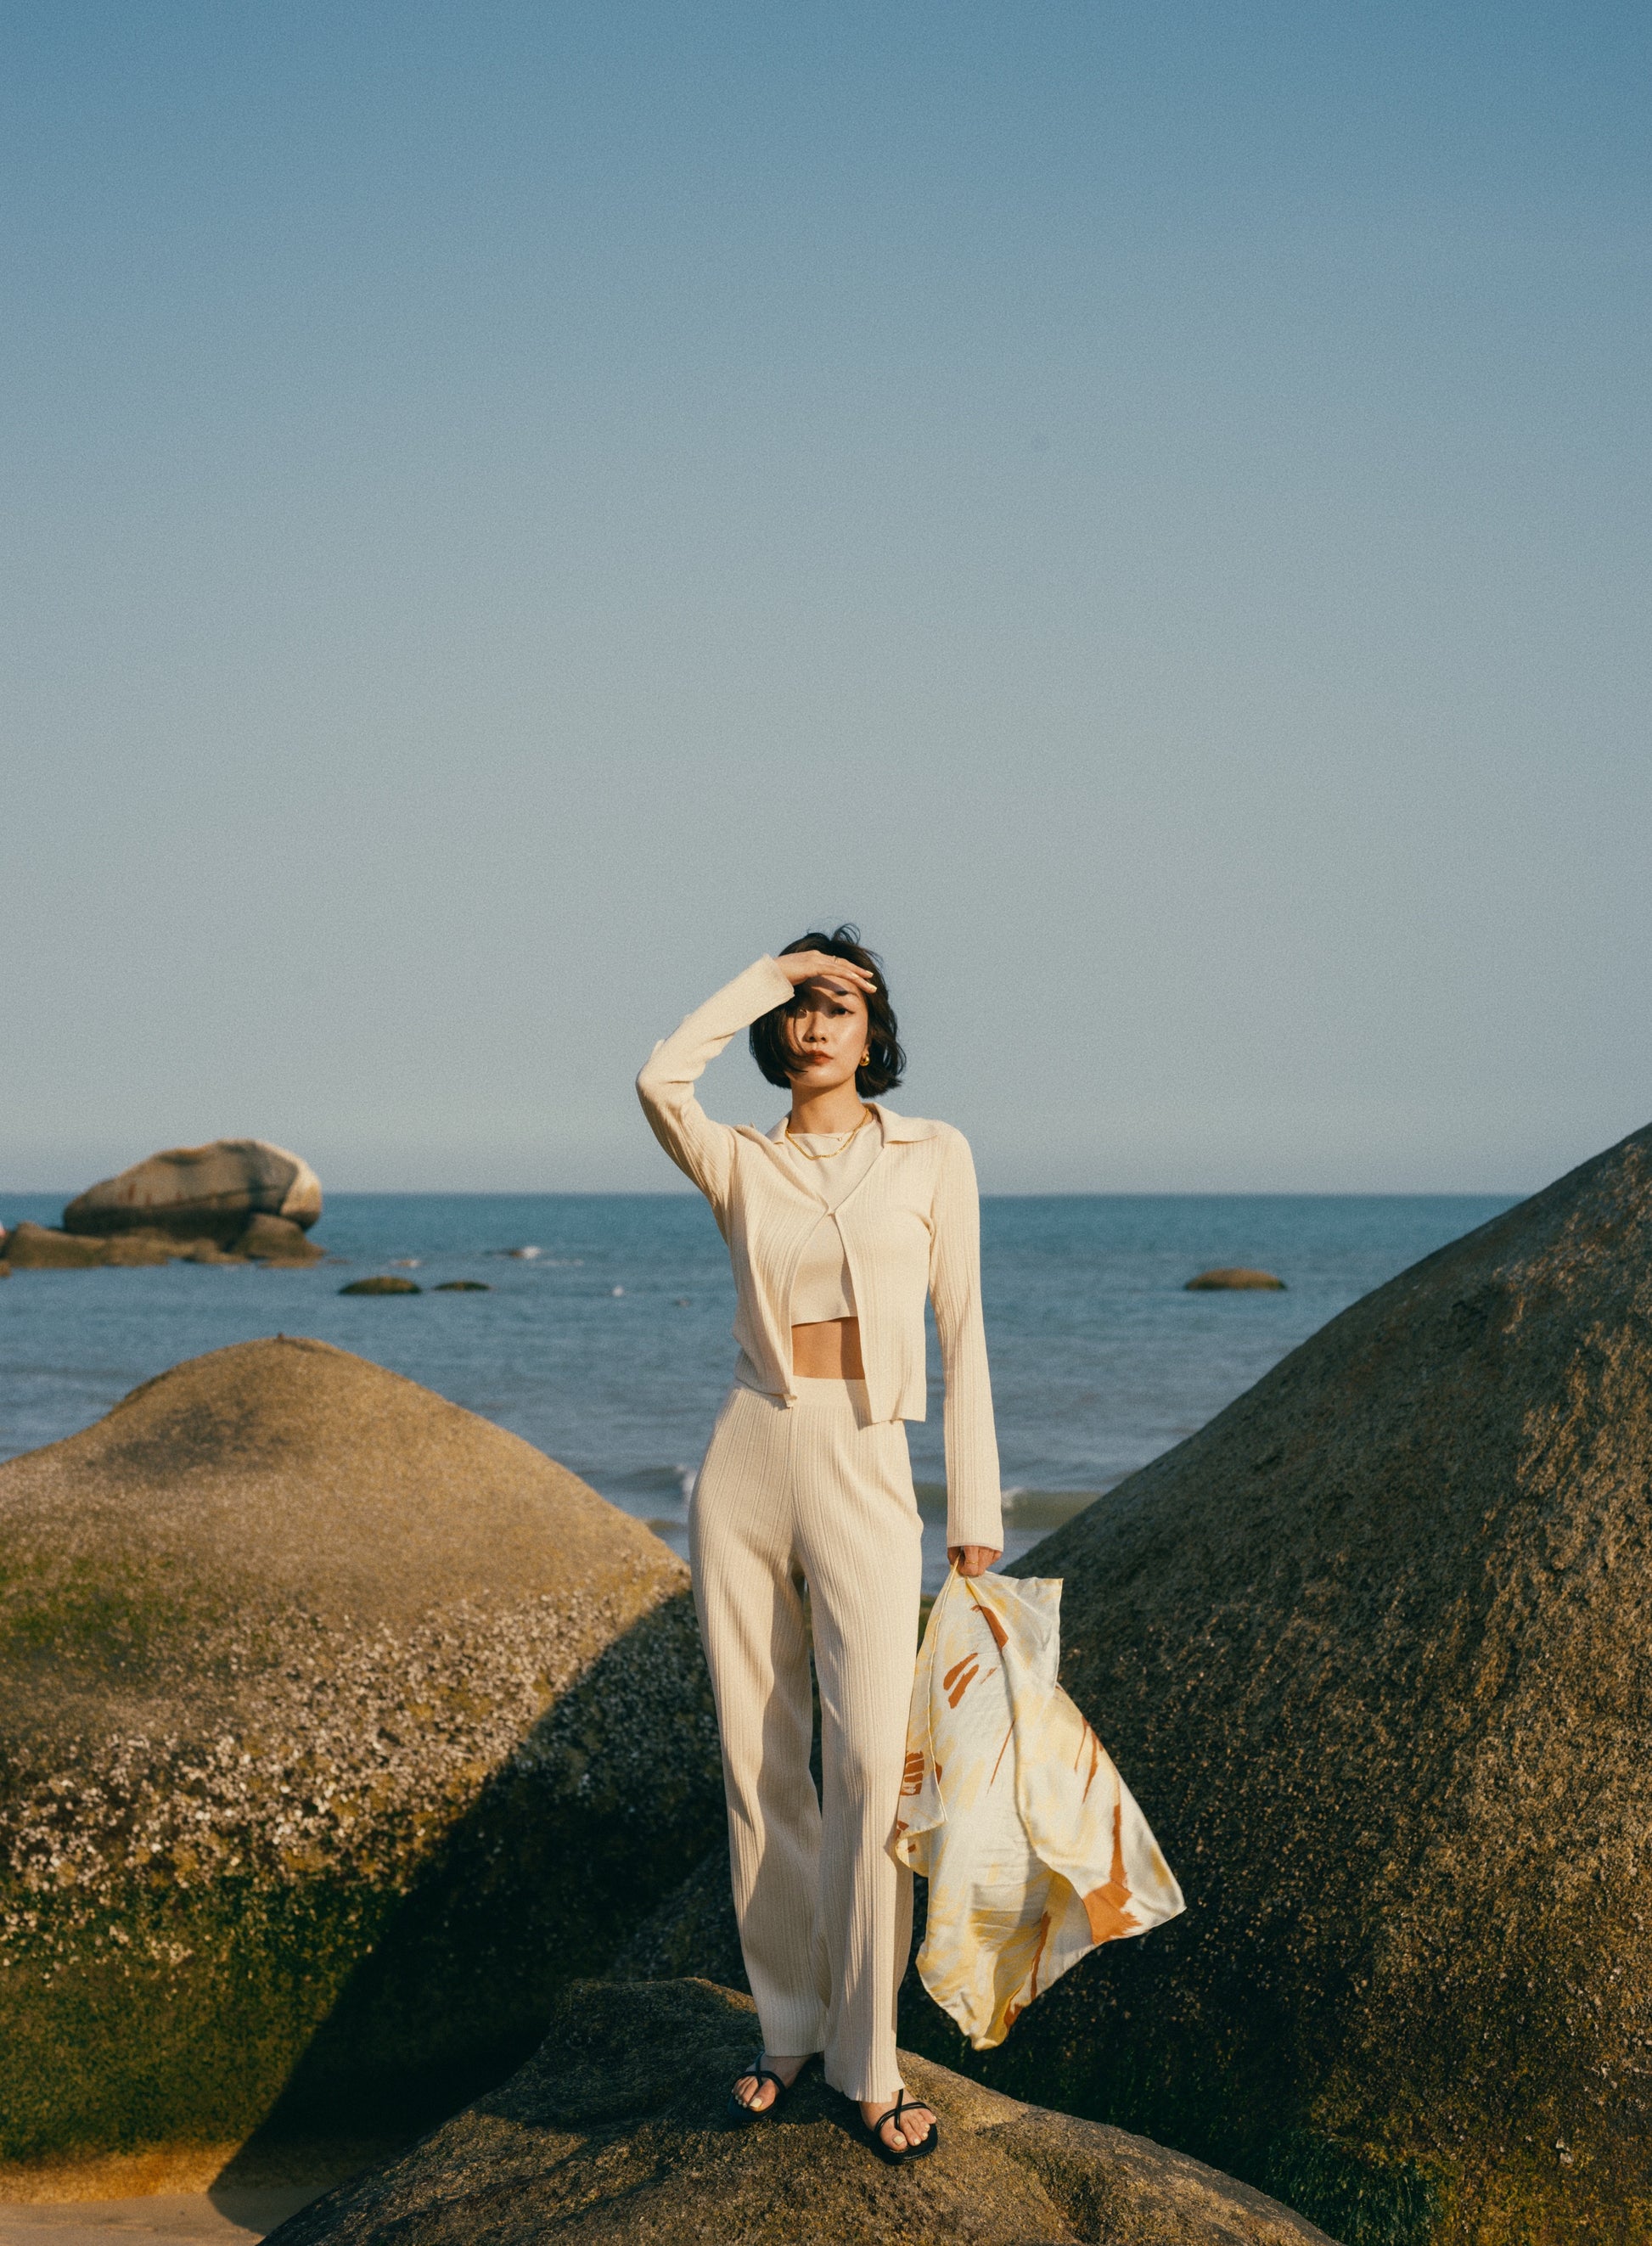 Woman by beach wearing off white knit cardigan with collar over matching tank top and pants